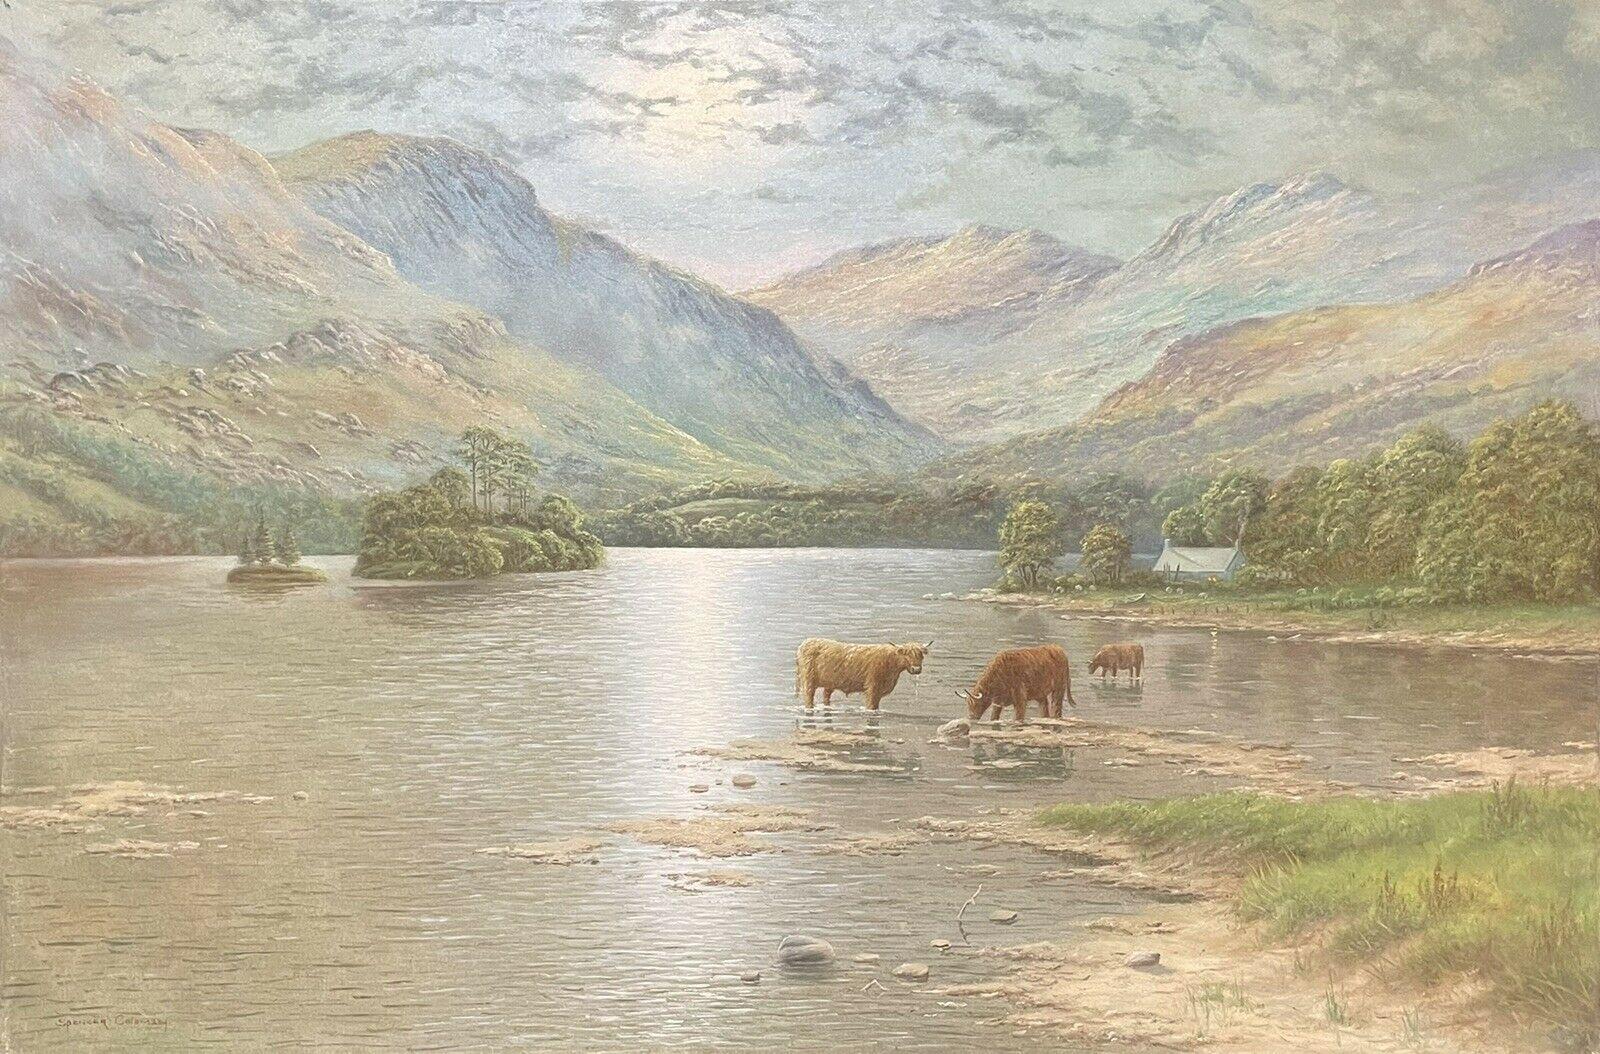 Scottish Highlands Loch Scene with Cattle Watering Fading Sunset Light - Signed